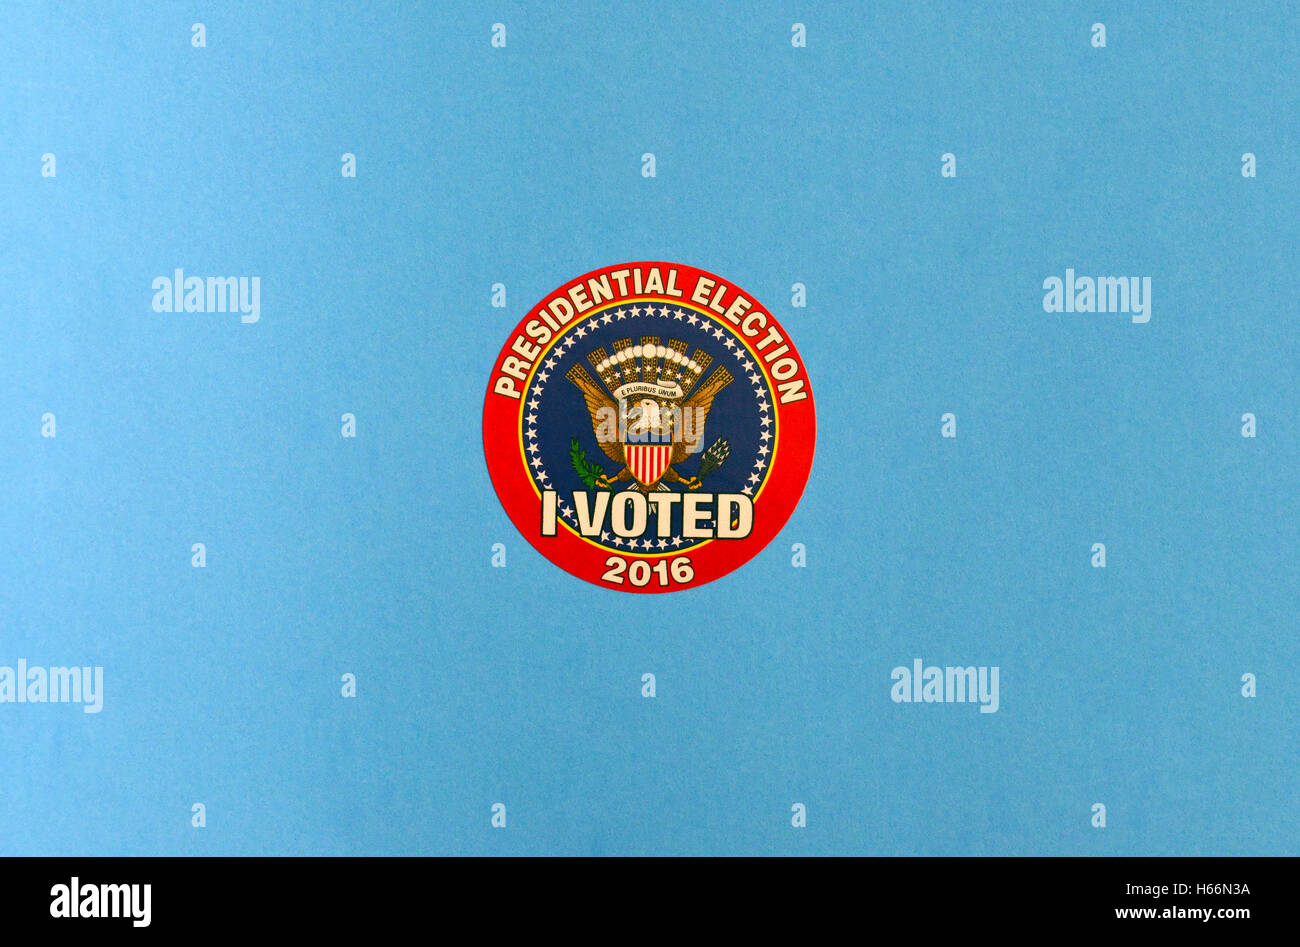 A colorful 'I VOTED' sticker is handed out to anyone voting in the 2016 United States Presidential Election. Stock Photo